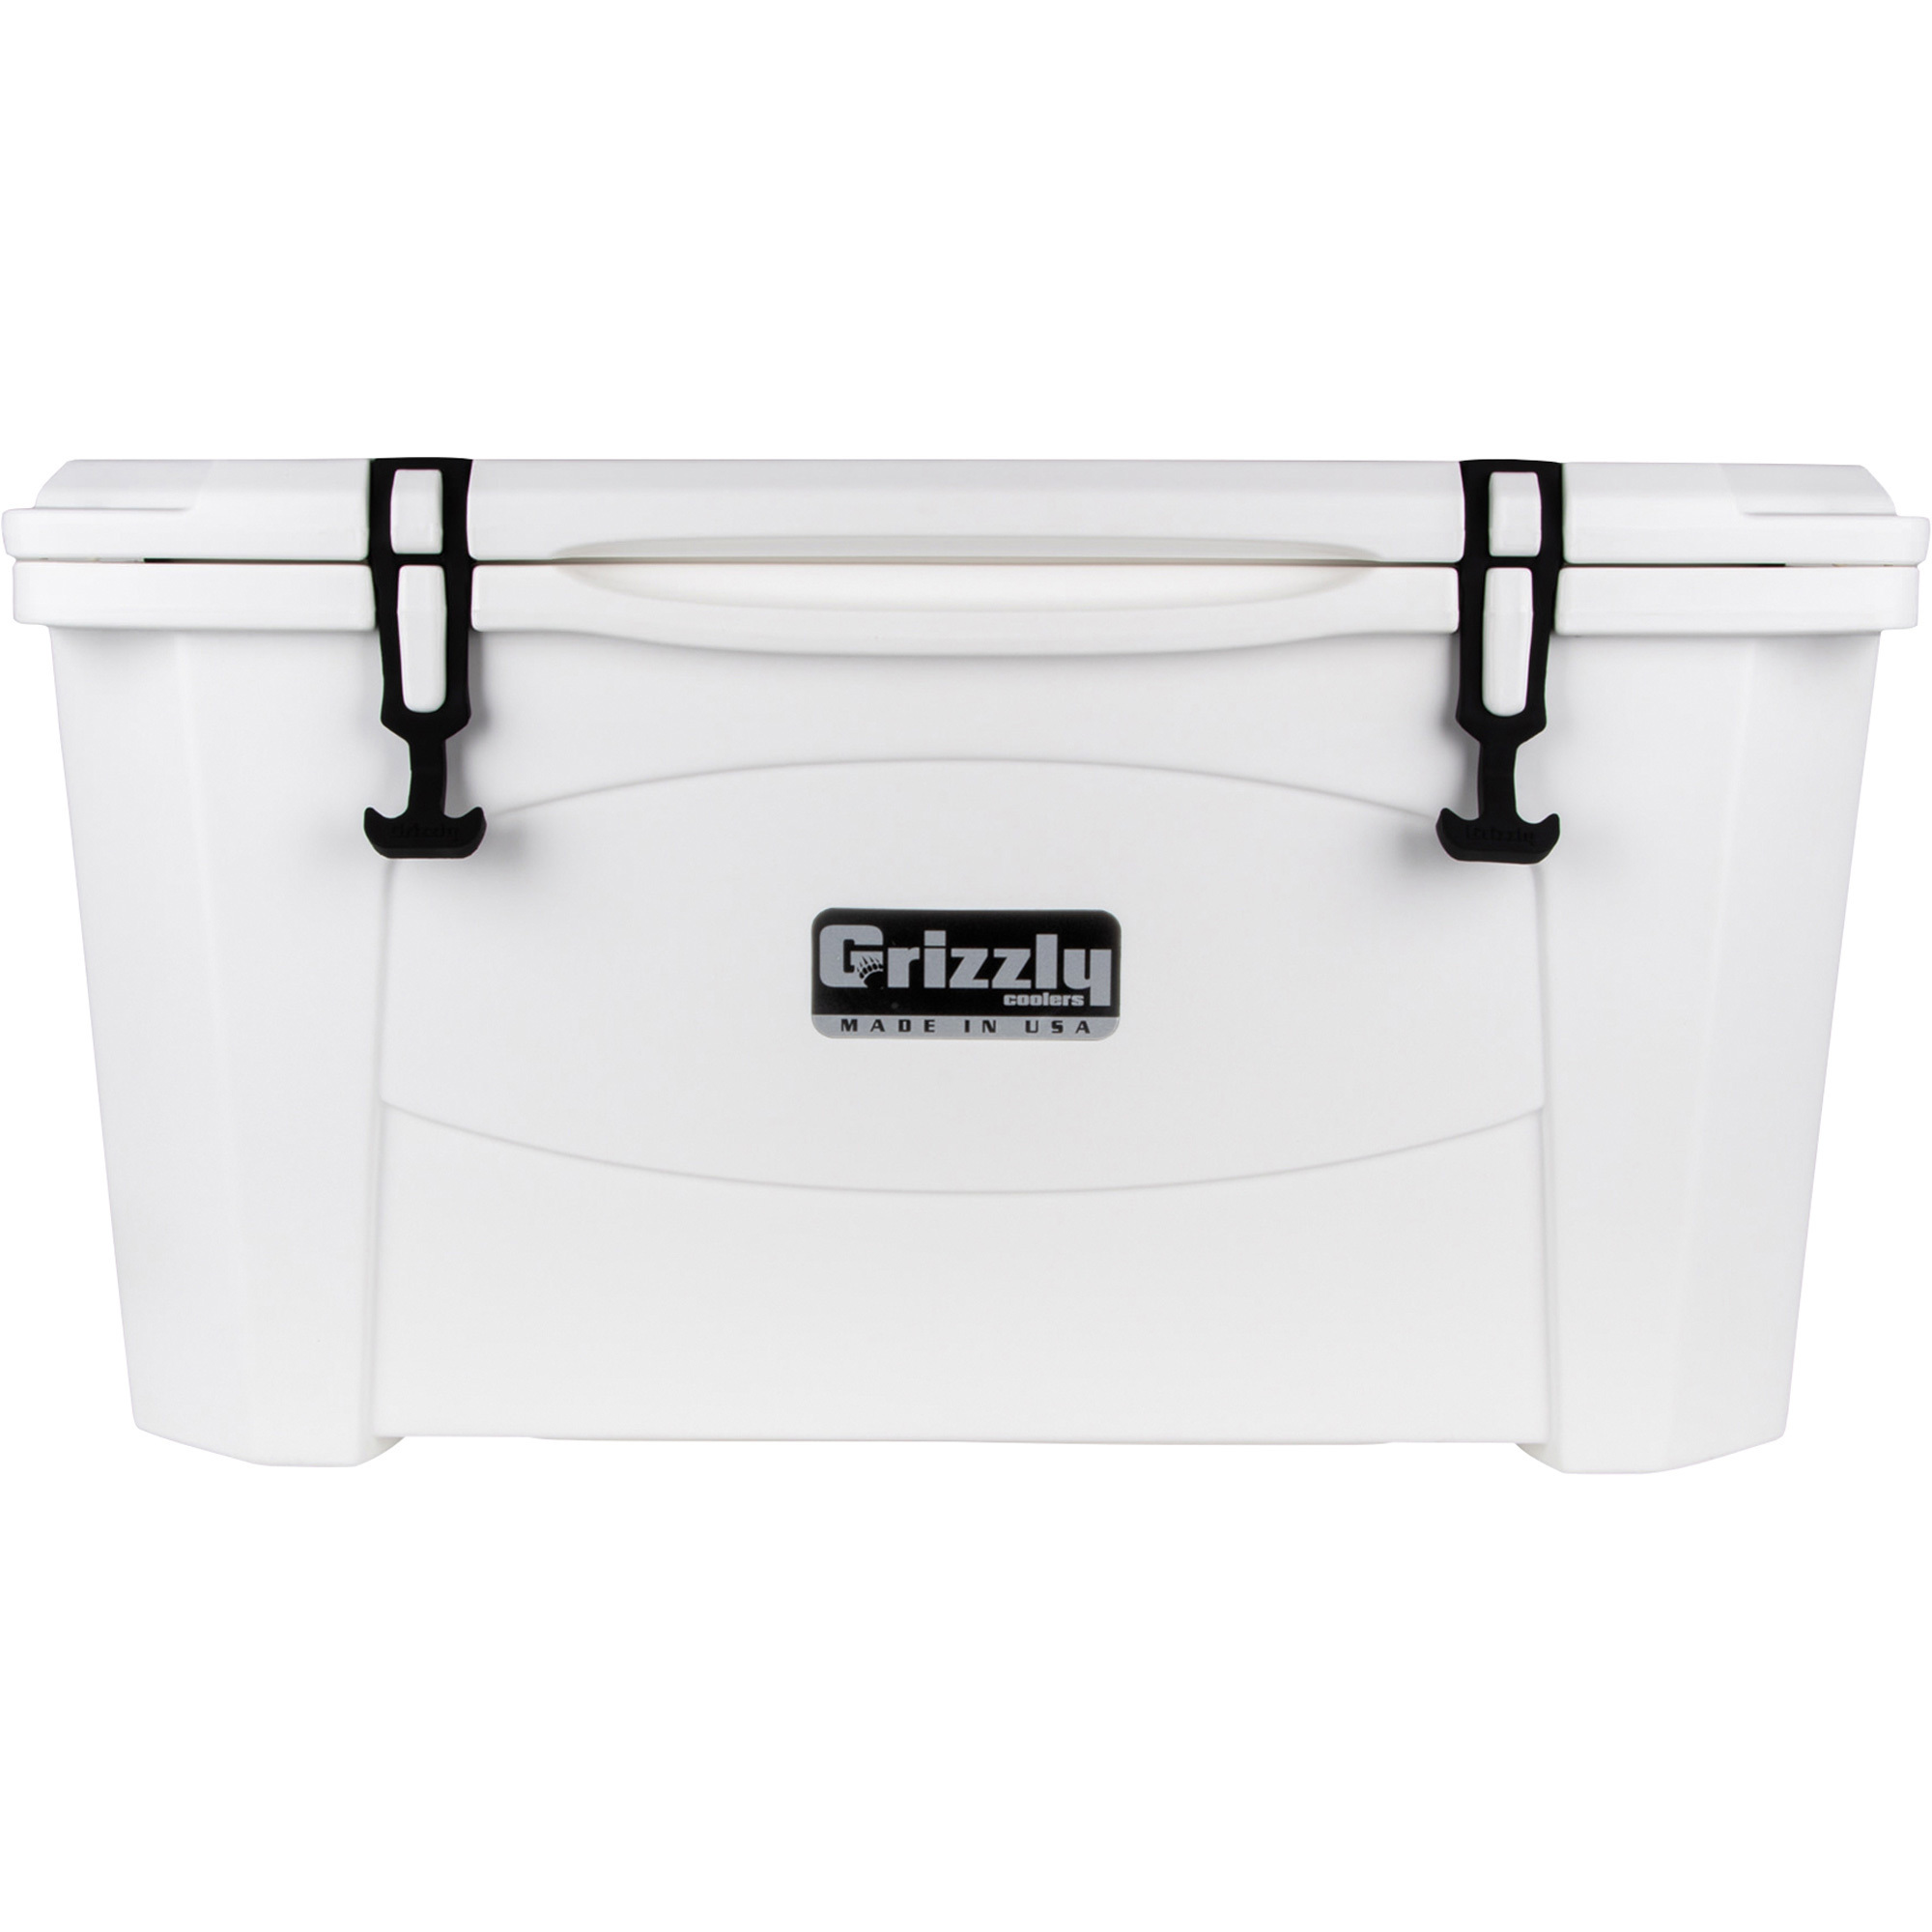 Grizzly Cooler 60-qt. White, Model G-60